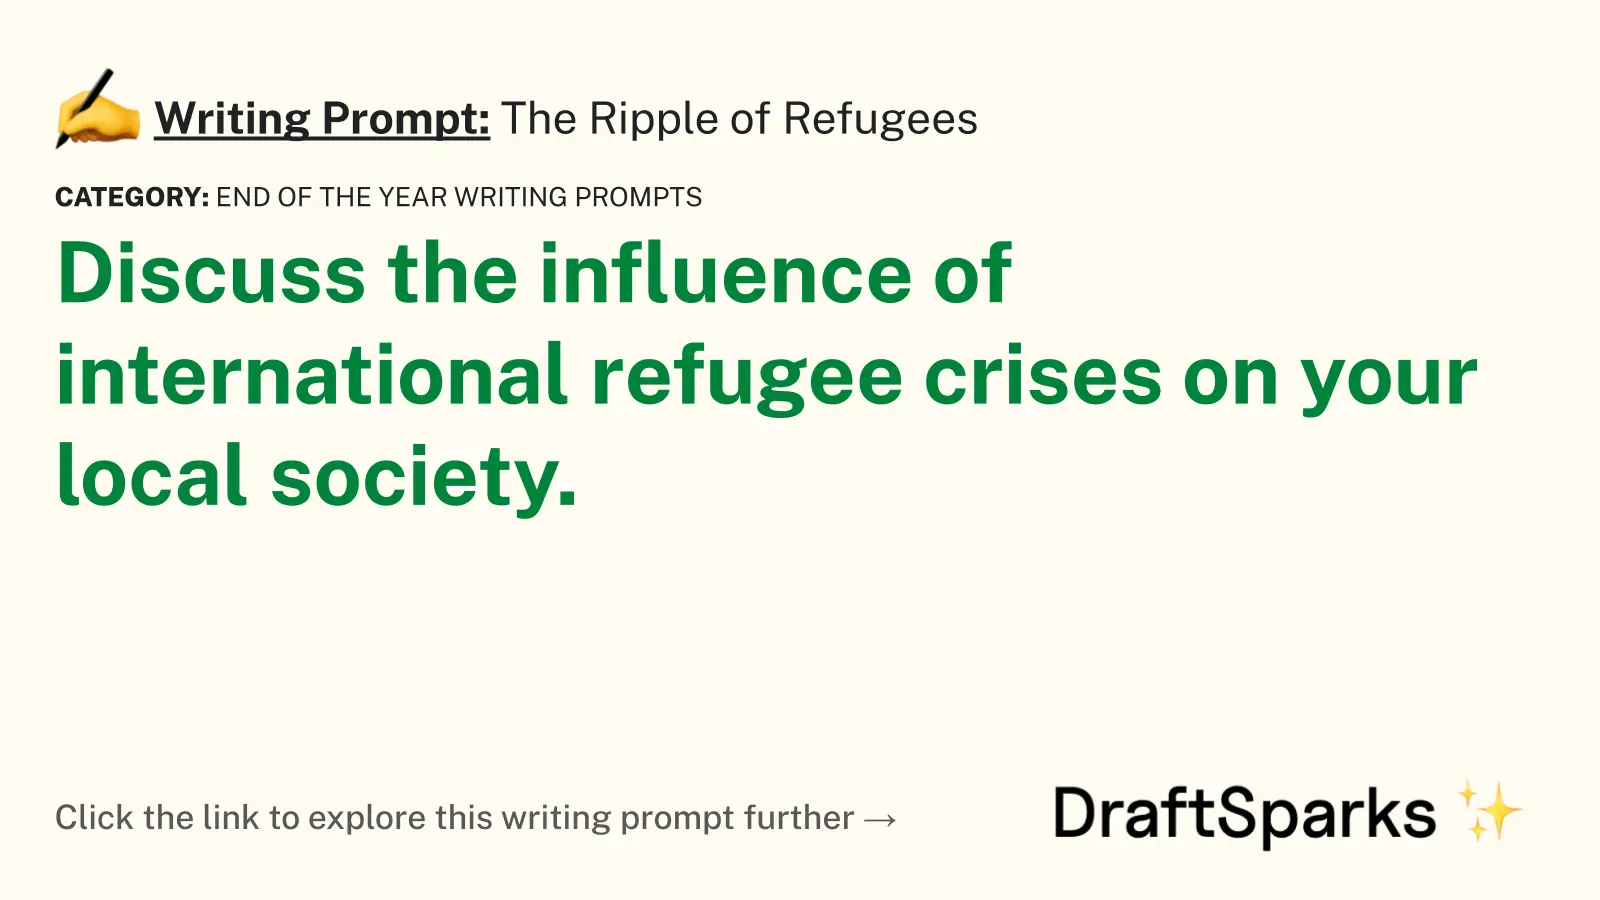 The Ripple of Refugees